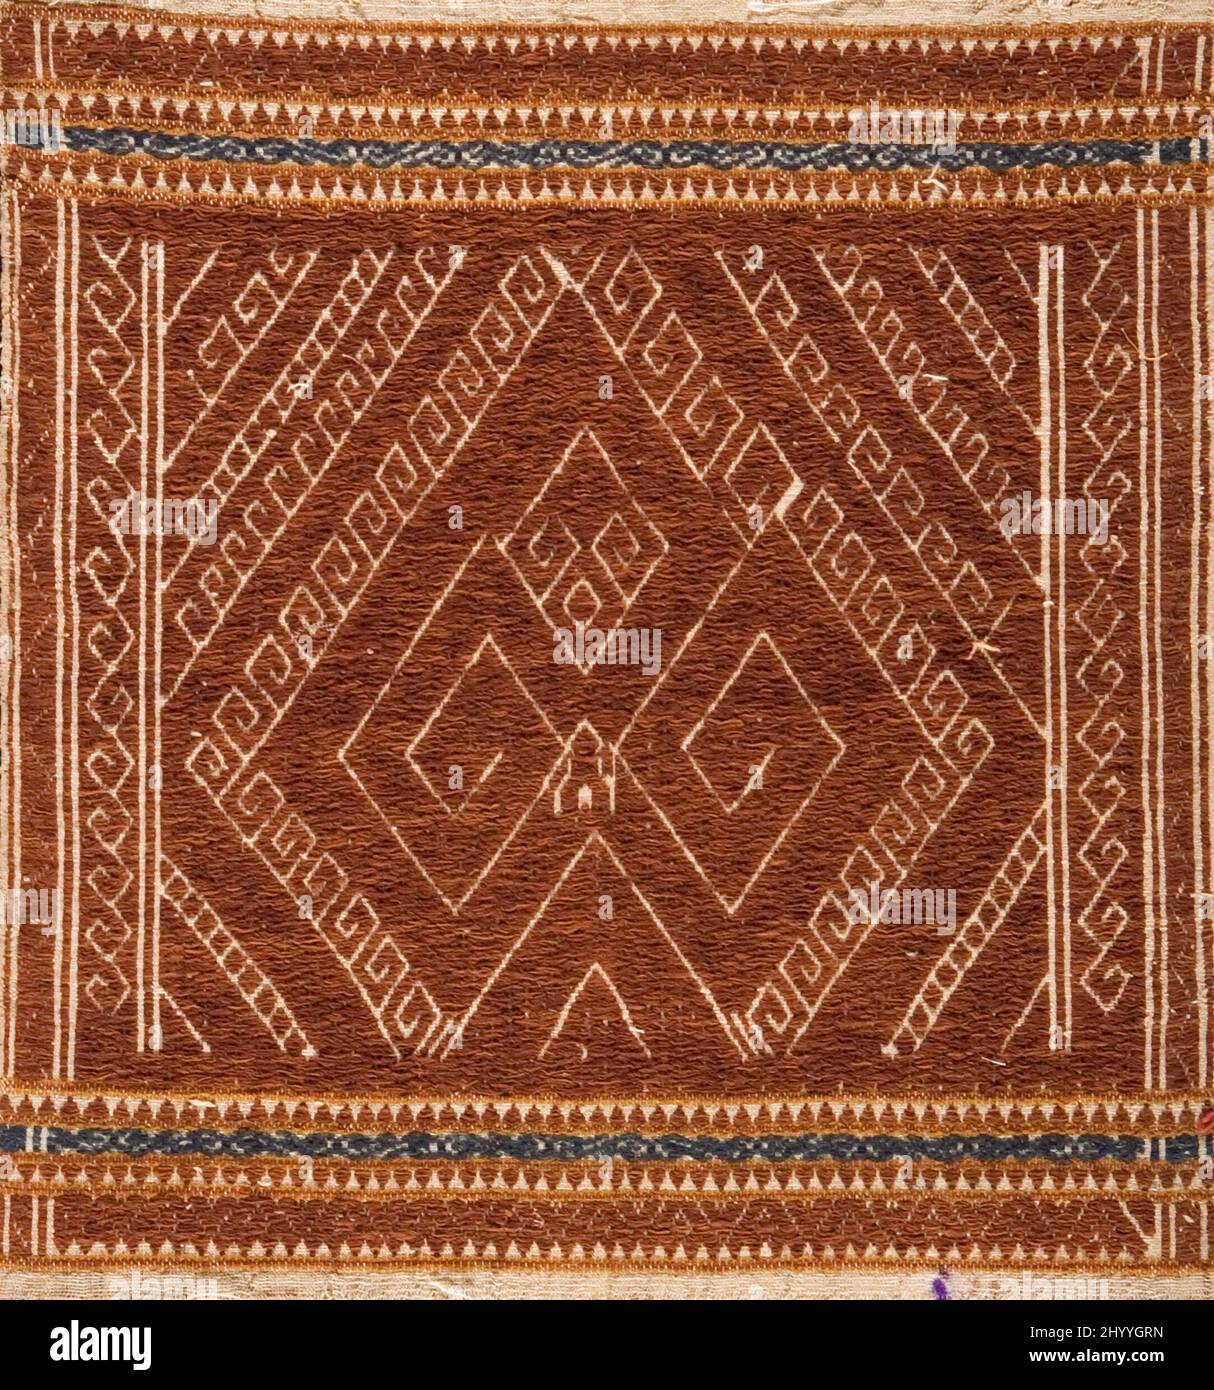 Ceremonial Textile (Tampan). Indonesia, South Sumatra, Lampung, late 19th century. Textiles. Cotton plain weave and supplementary weft patterning Stock Photo